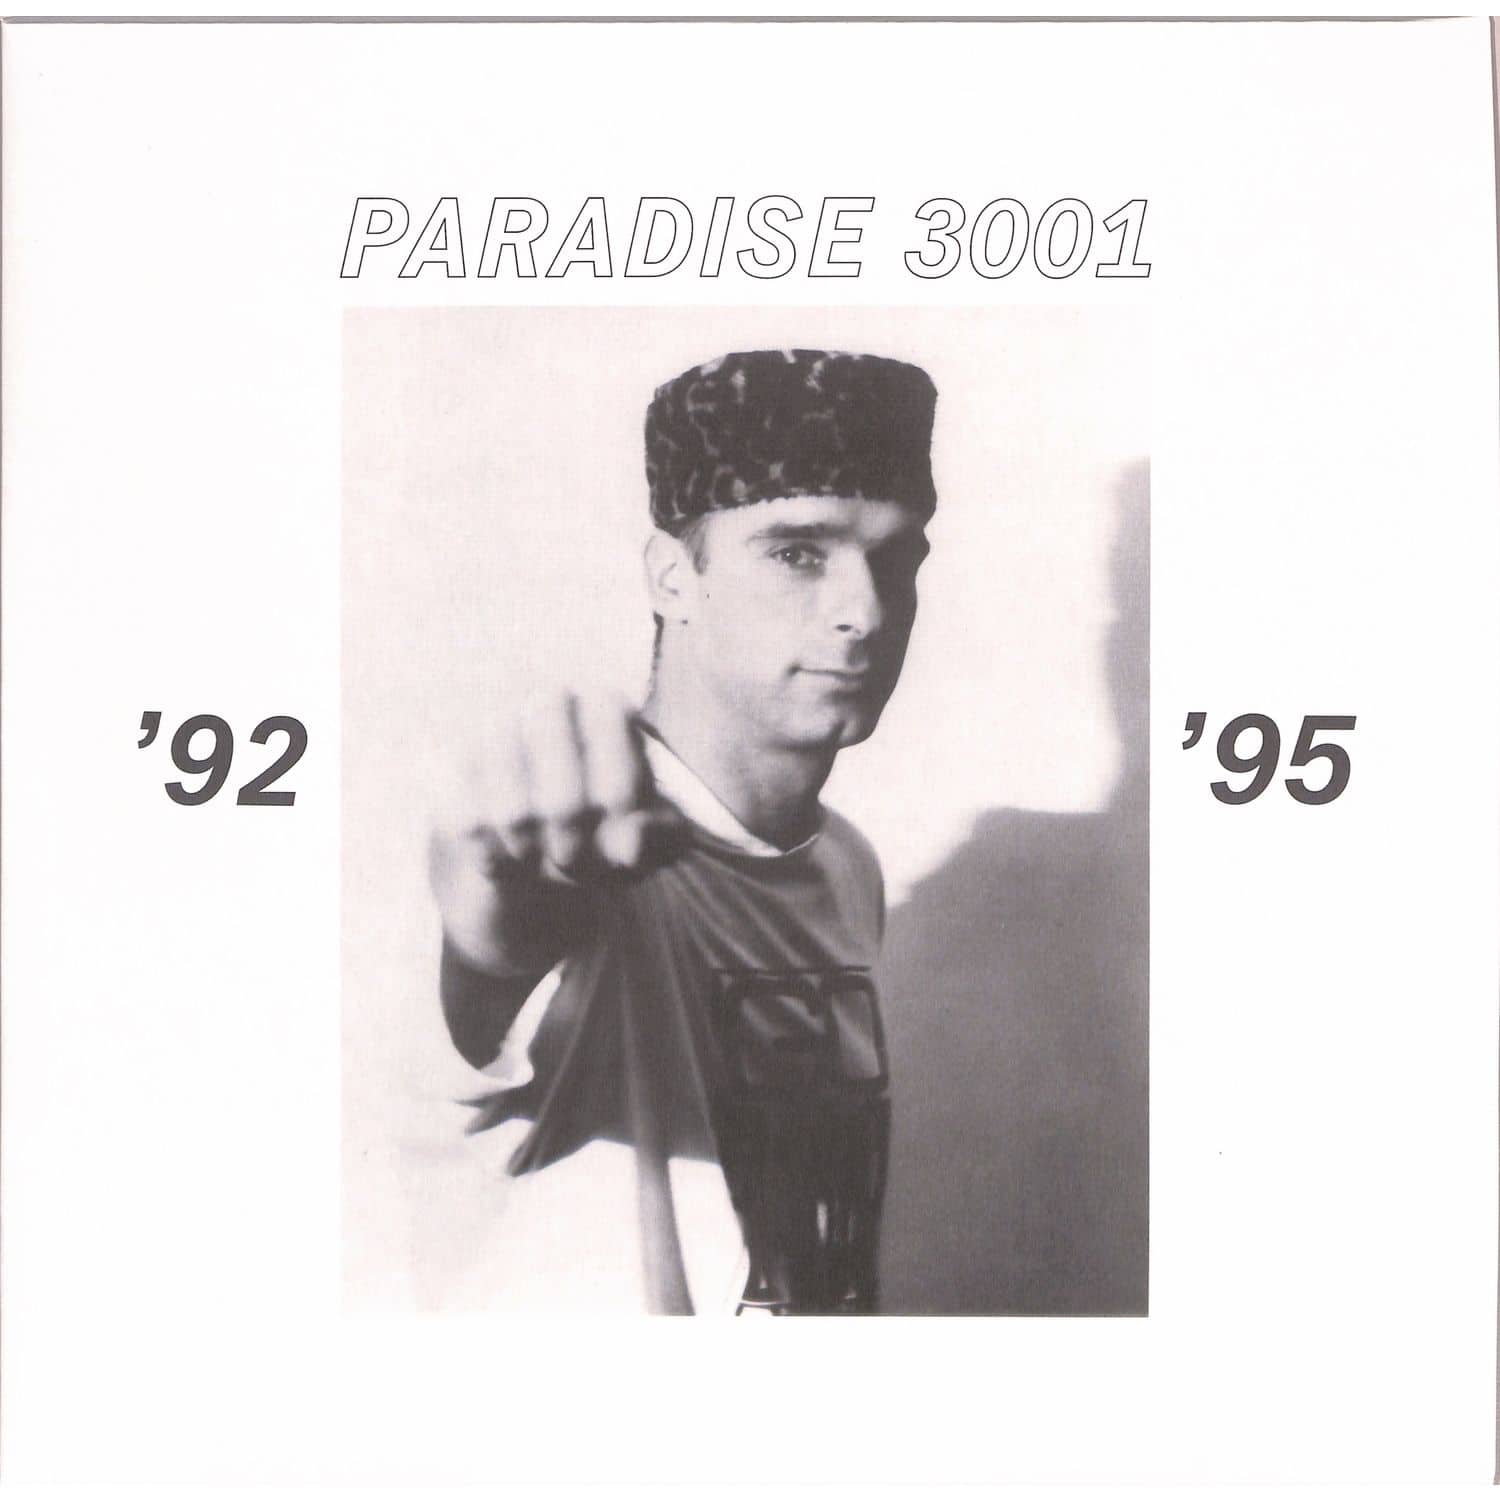 Paradise 3001 - SELECTED WORKS FROM BETWEEN 1992 AND 1995 